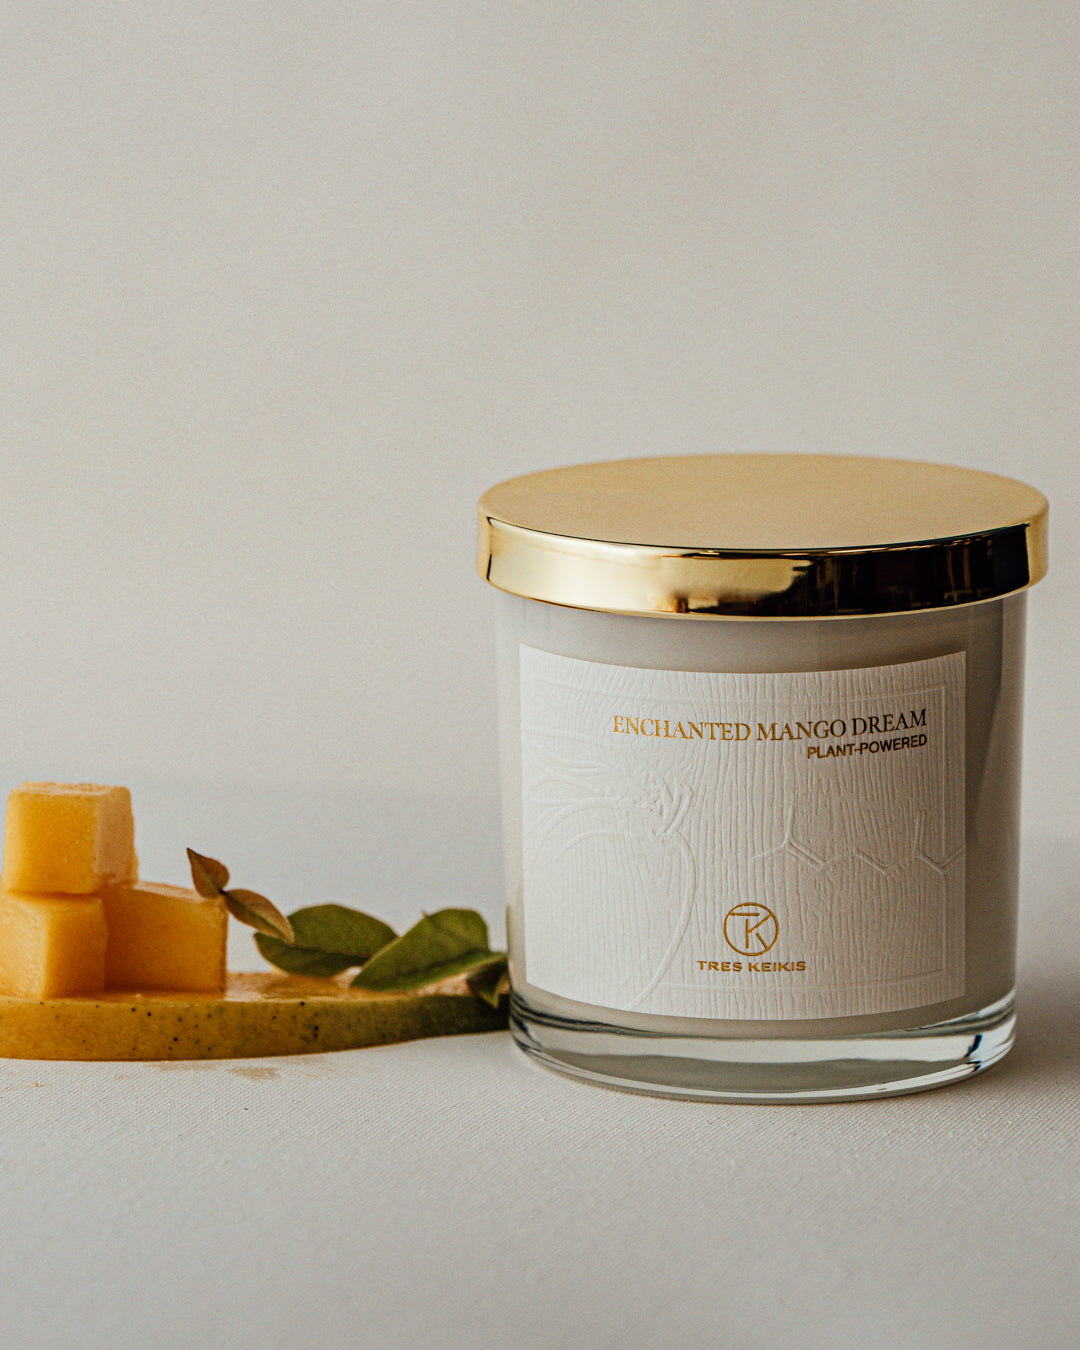 A candle in a clear glass jar with shiny gold lid and a wood-textured white label with embossed plant and molecule art. The words Enchanted Mango Dream and Tres Keikis logo are printed in gold foil. Decorative sliced and cubed mango with green garnish sit beside it and it all is on a white backdrop.